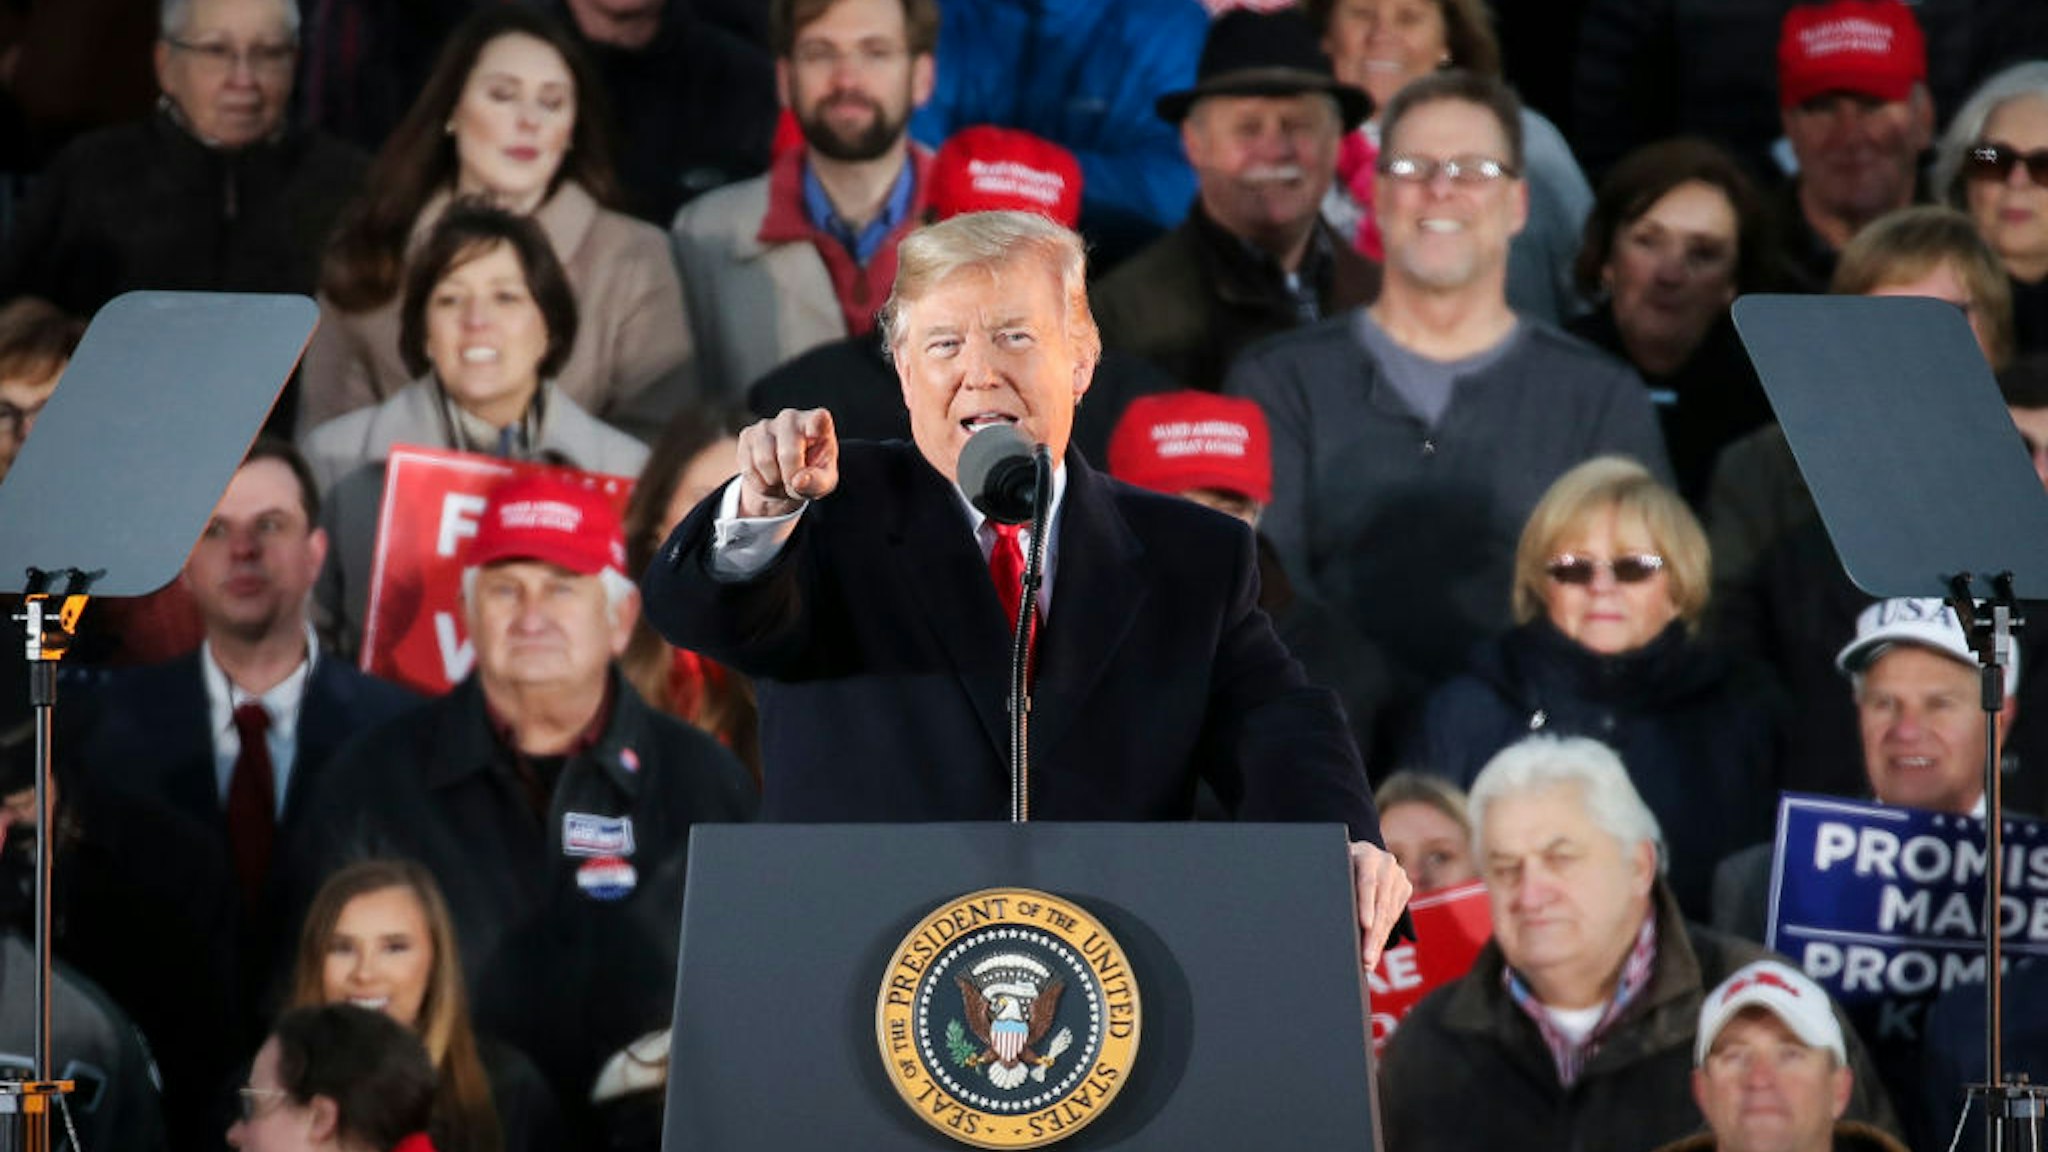 President Donald Trump speaks during a rally at the Tupelo Regional Airport, November 26, 2018 in Tupelo, Mississippi.